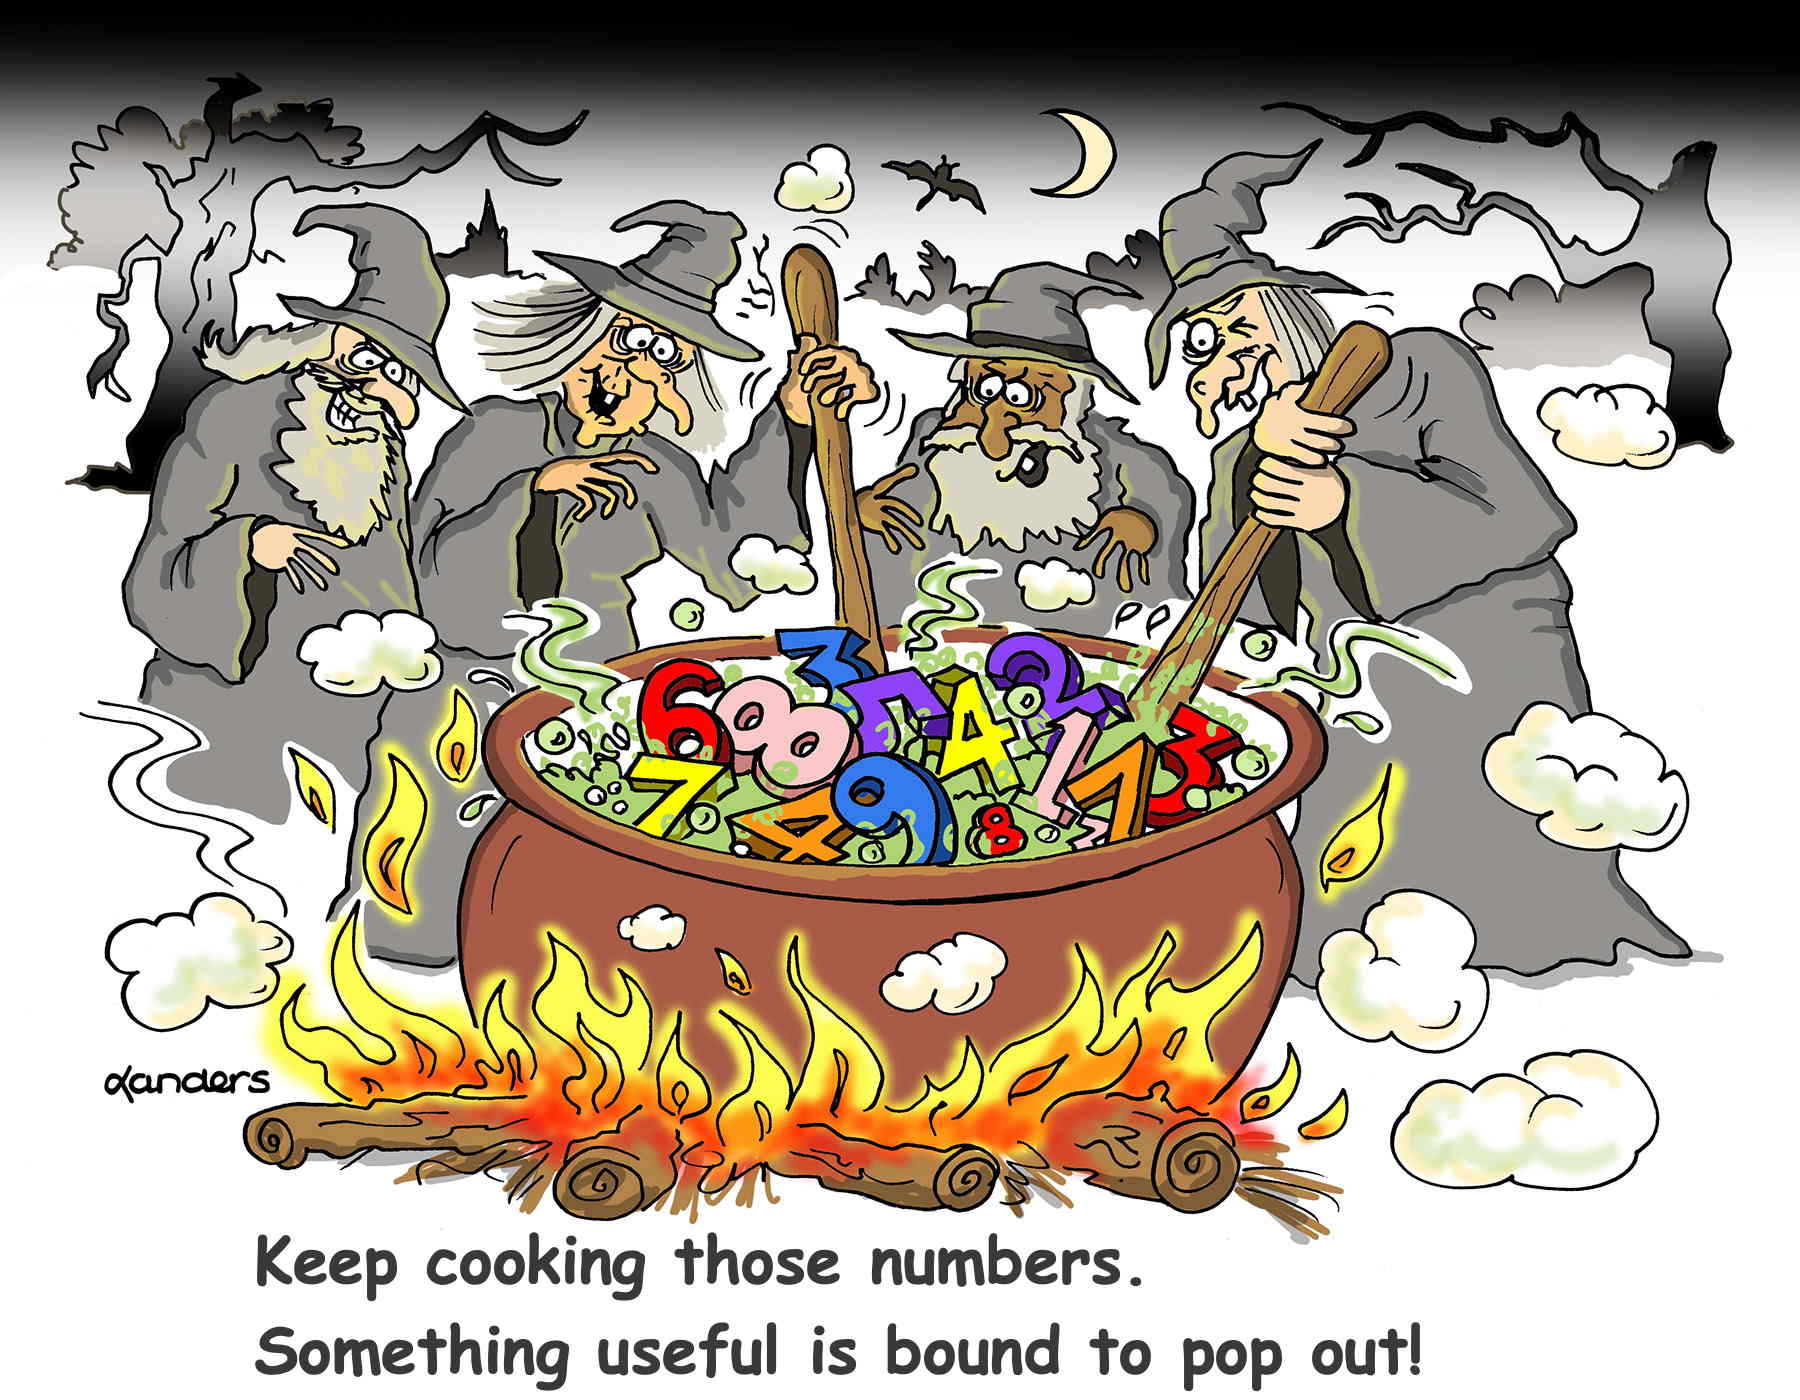 Cartoon with four witches stirring a potion but the pot is filled with numbers.  Caption says: Keep cooking those numbers. Something useful is bound to pop out!